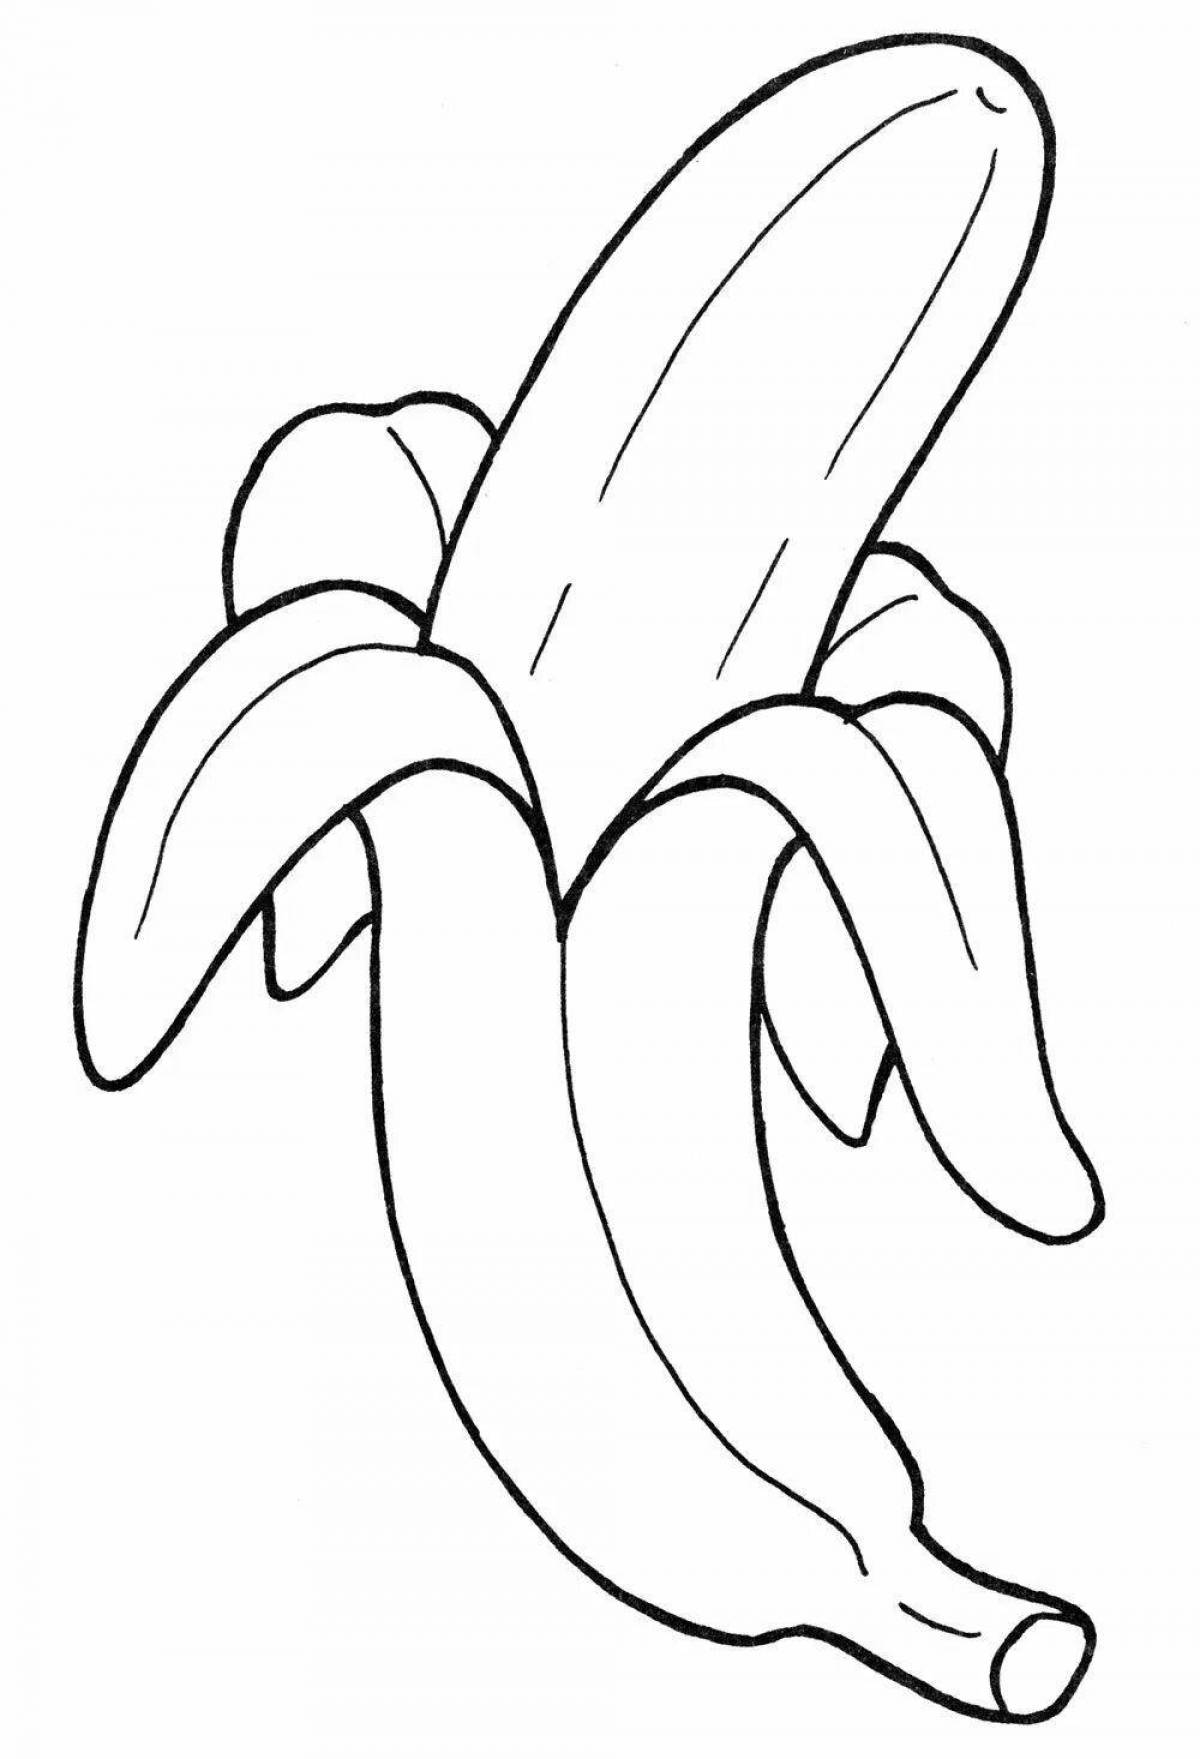 Playful banana coloring book for 2-3 year olds